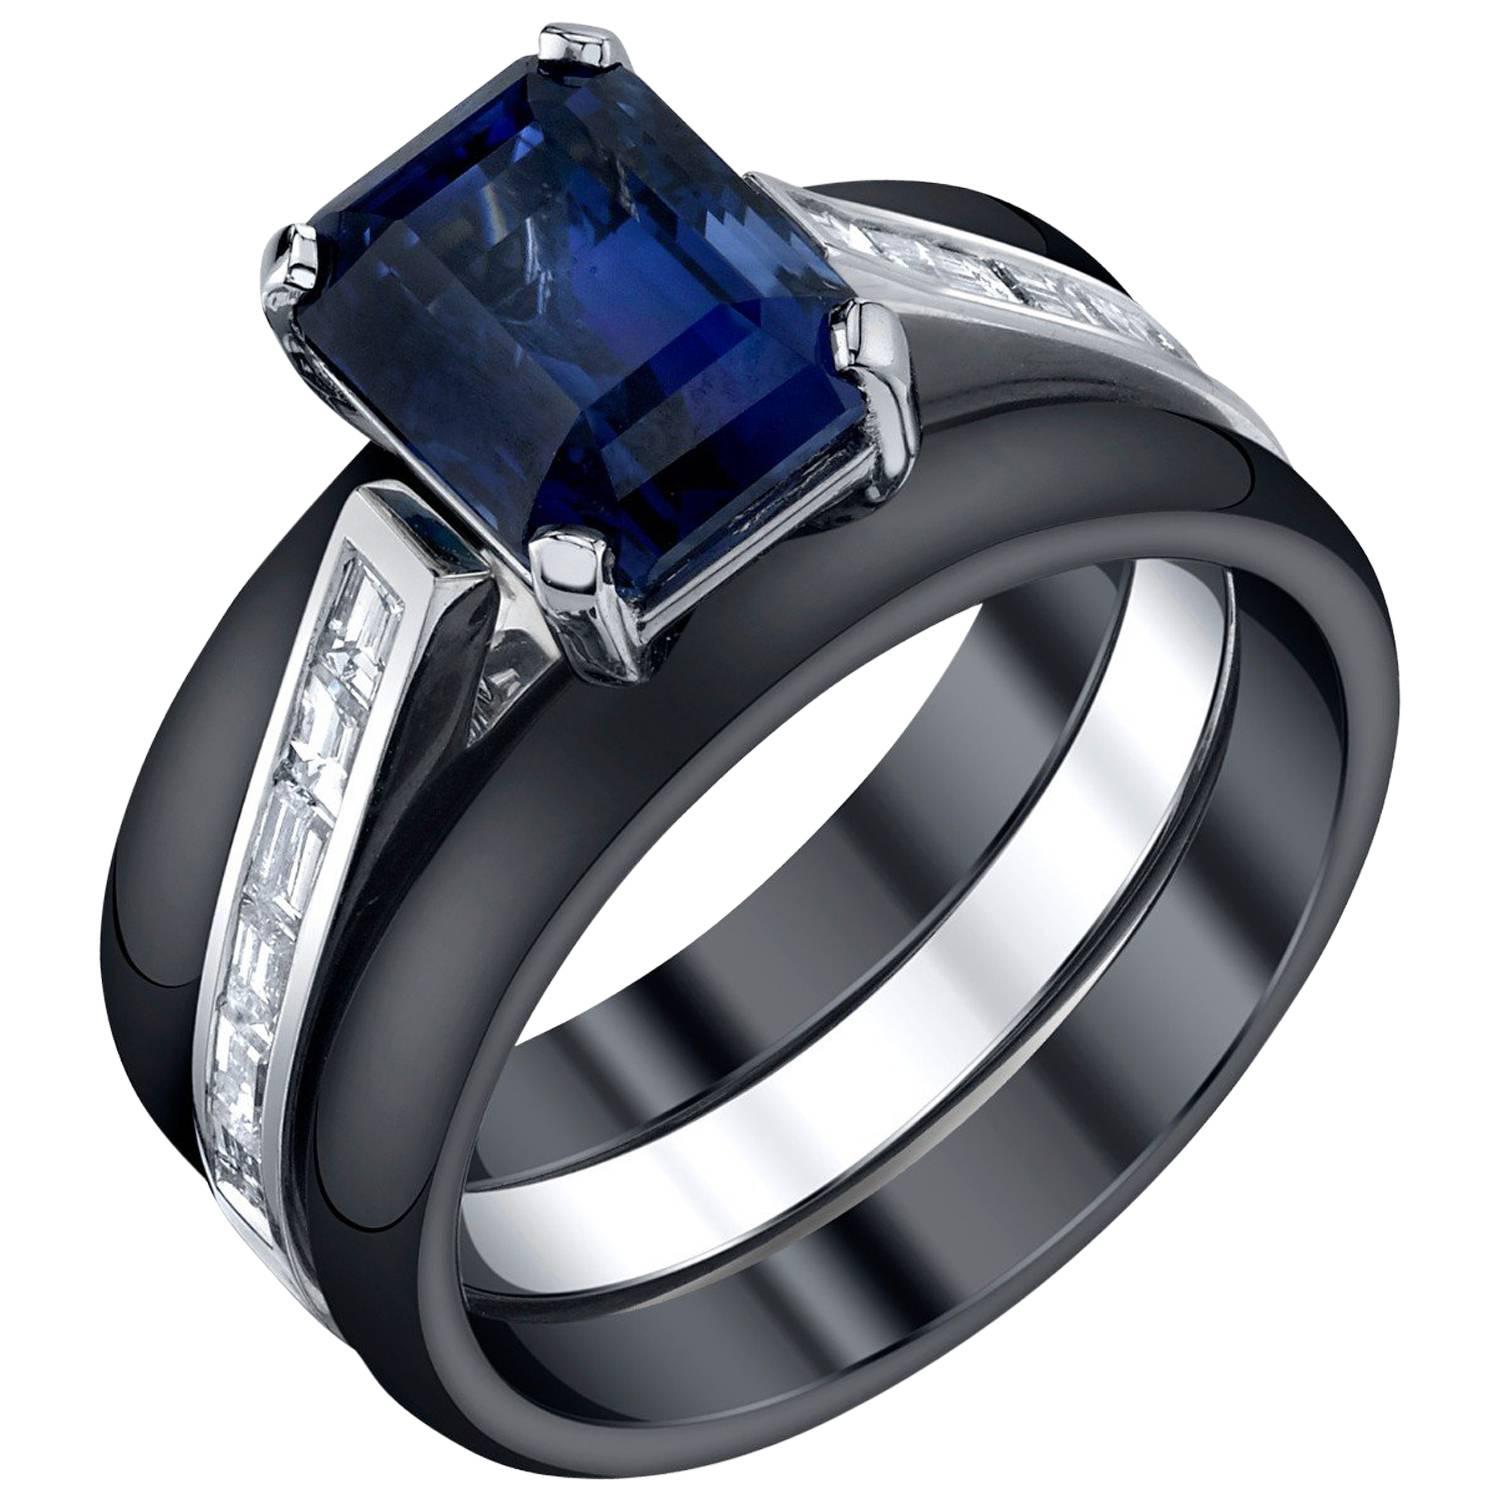 A rich, royal blue sapphire is set with twelve baguette diamonds in a stunning 18k white gold ring - part of our Sticks & Stones Collection. This ring includes 2 dramatic black ceramic bands for stacking. Handmade by our jewelers in Los